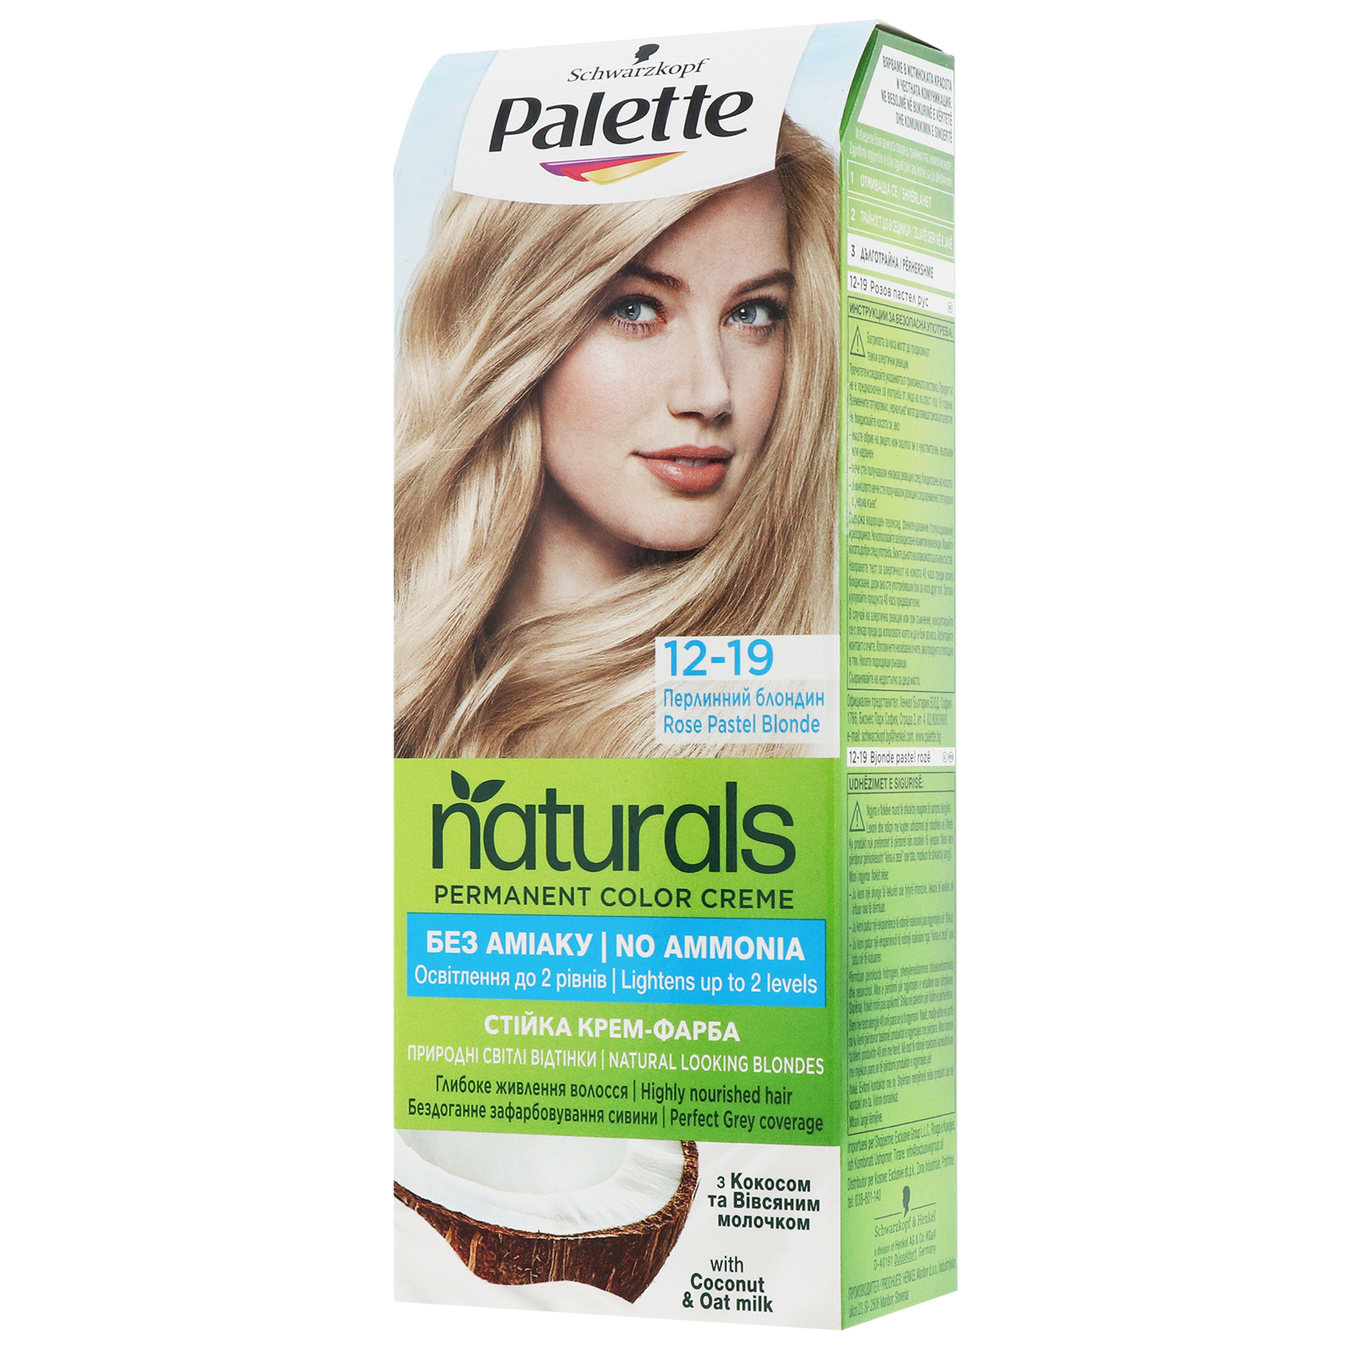 Cream-dye Palette Naturals 12-19 Pearl blonde without ammonia permanent hair color 110ml 5